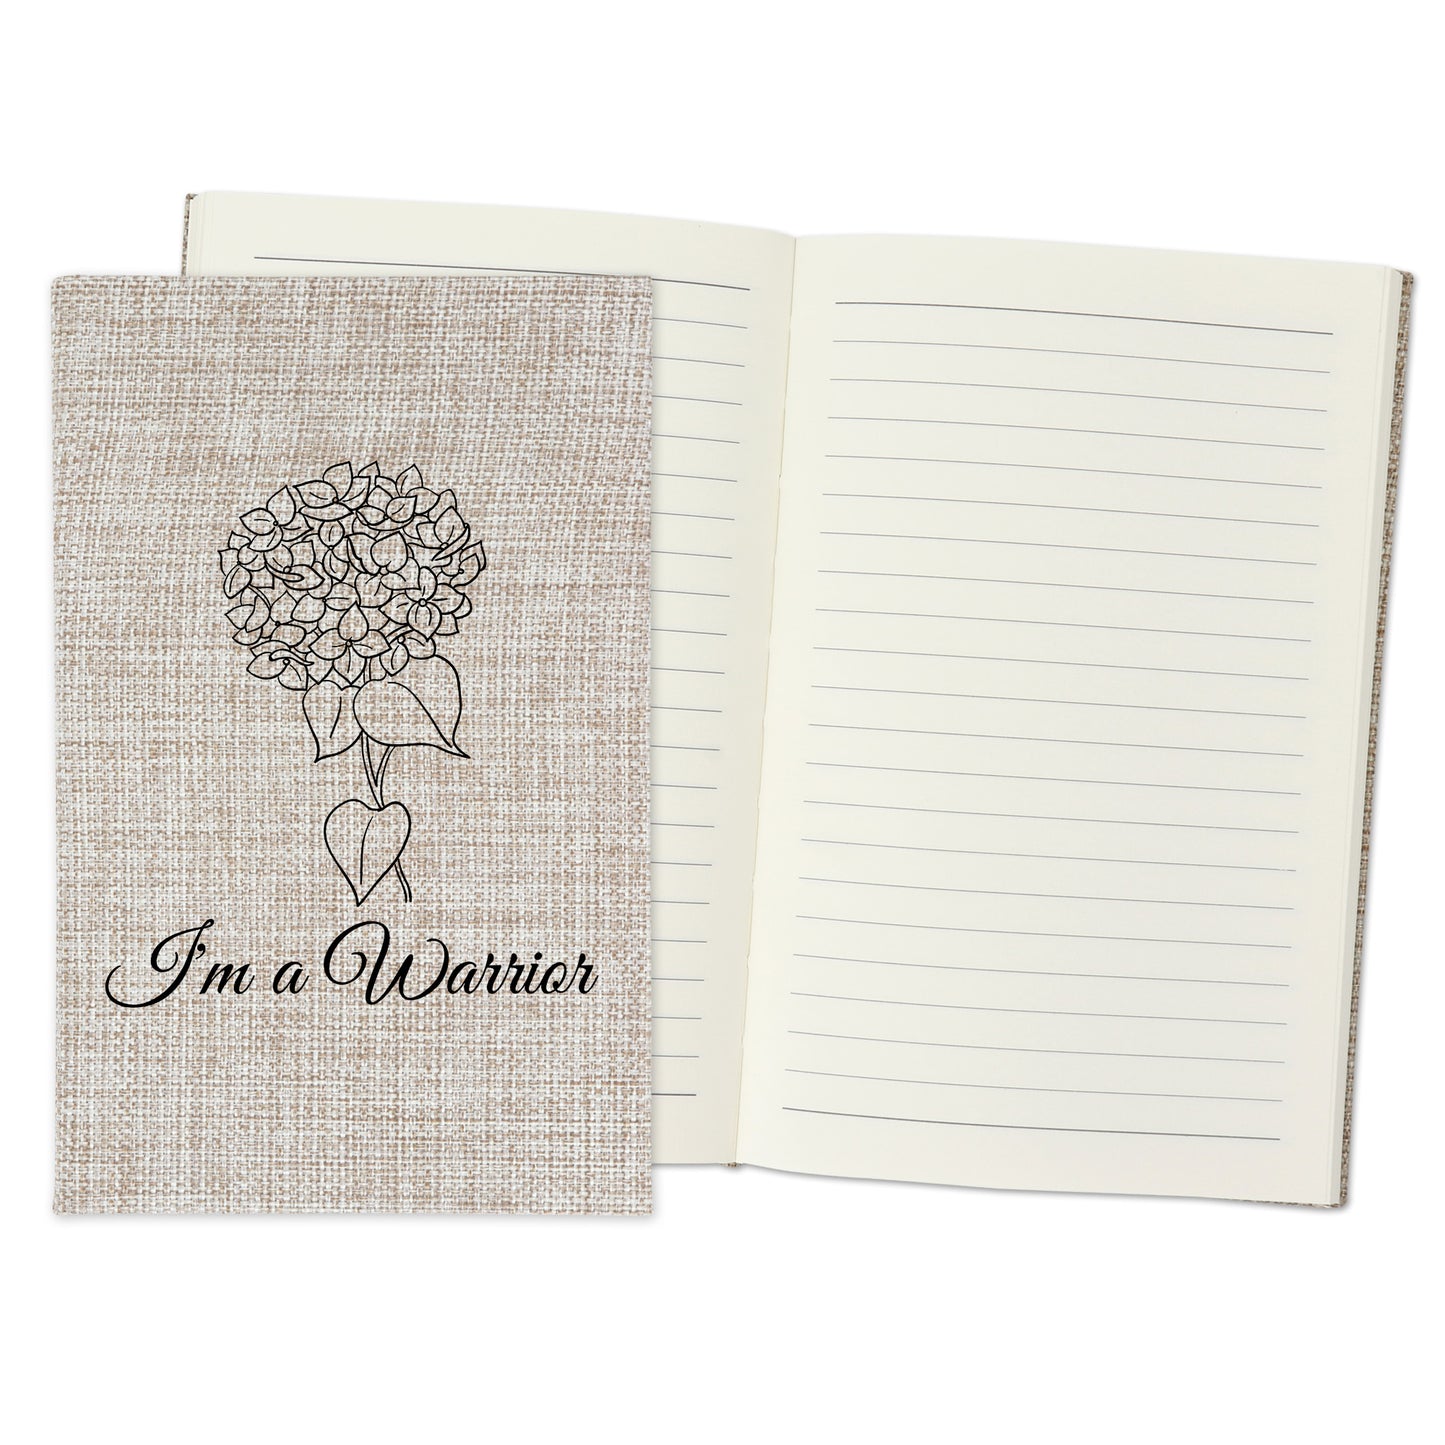 I'm a Warrior - Affirmation Quote Burlap Notebook Journal with Lined Pages